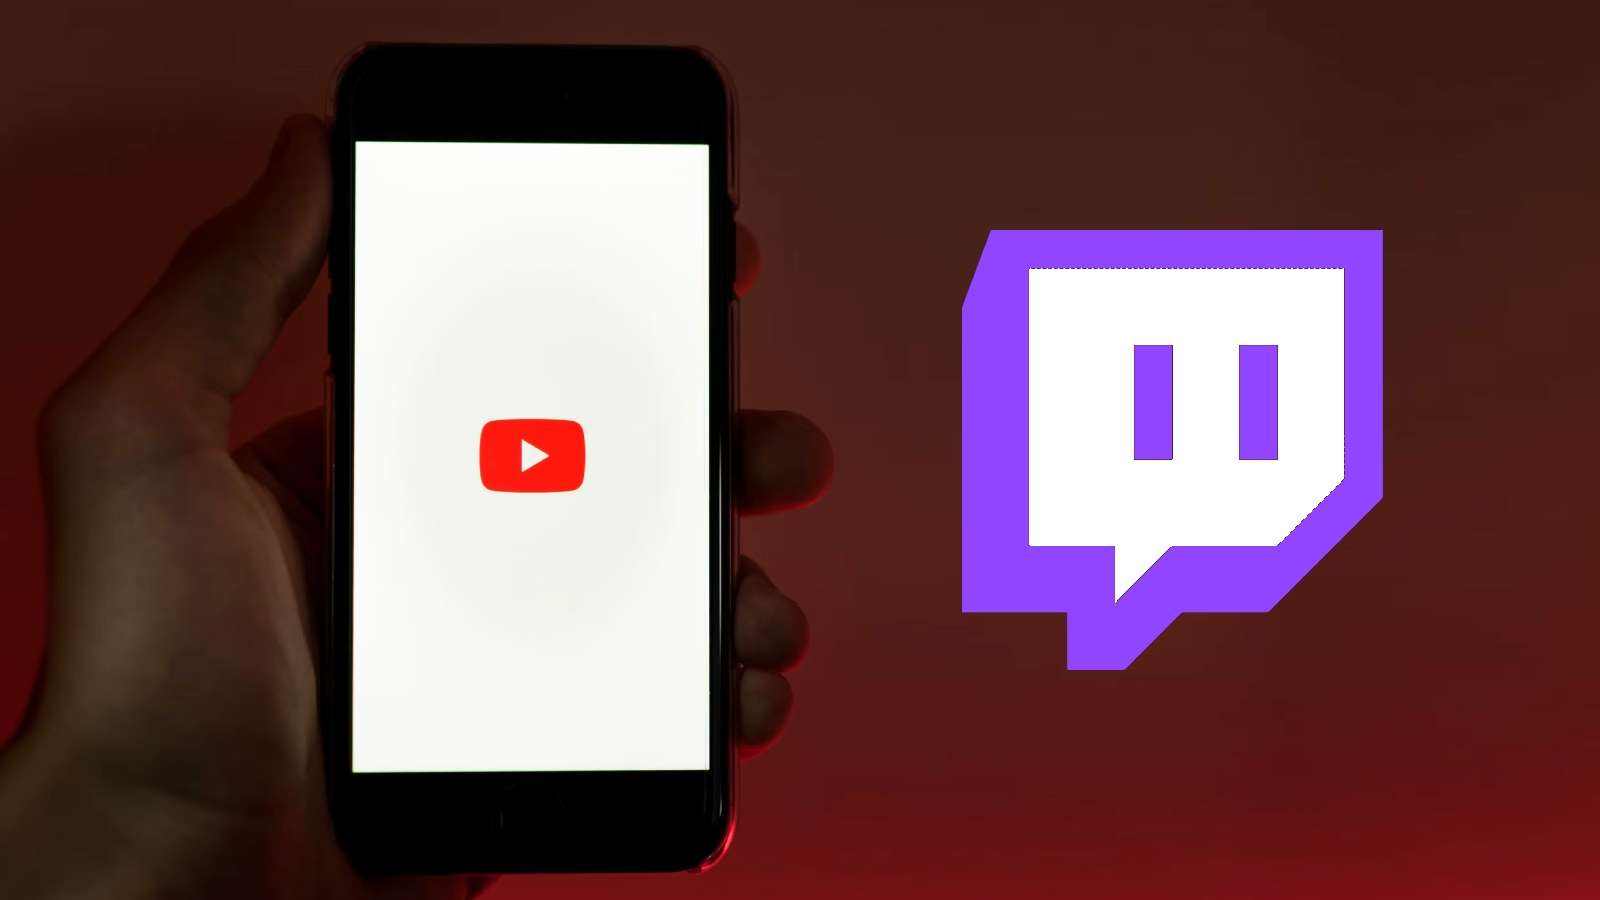 Youtube mobile app and twitch logo